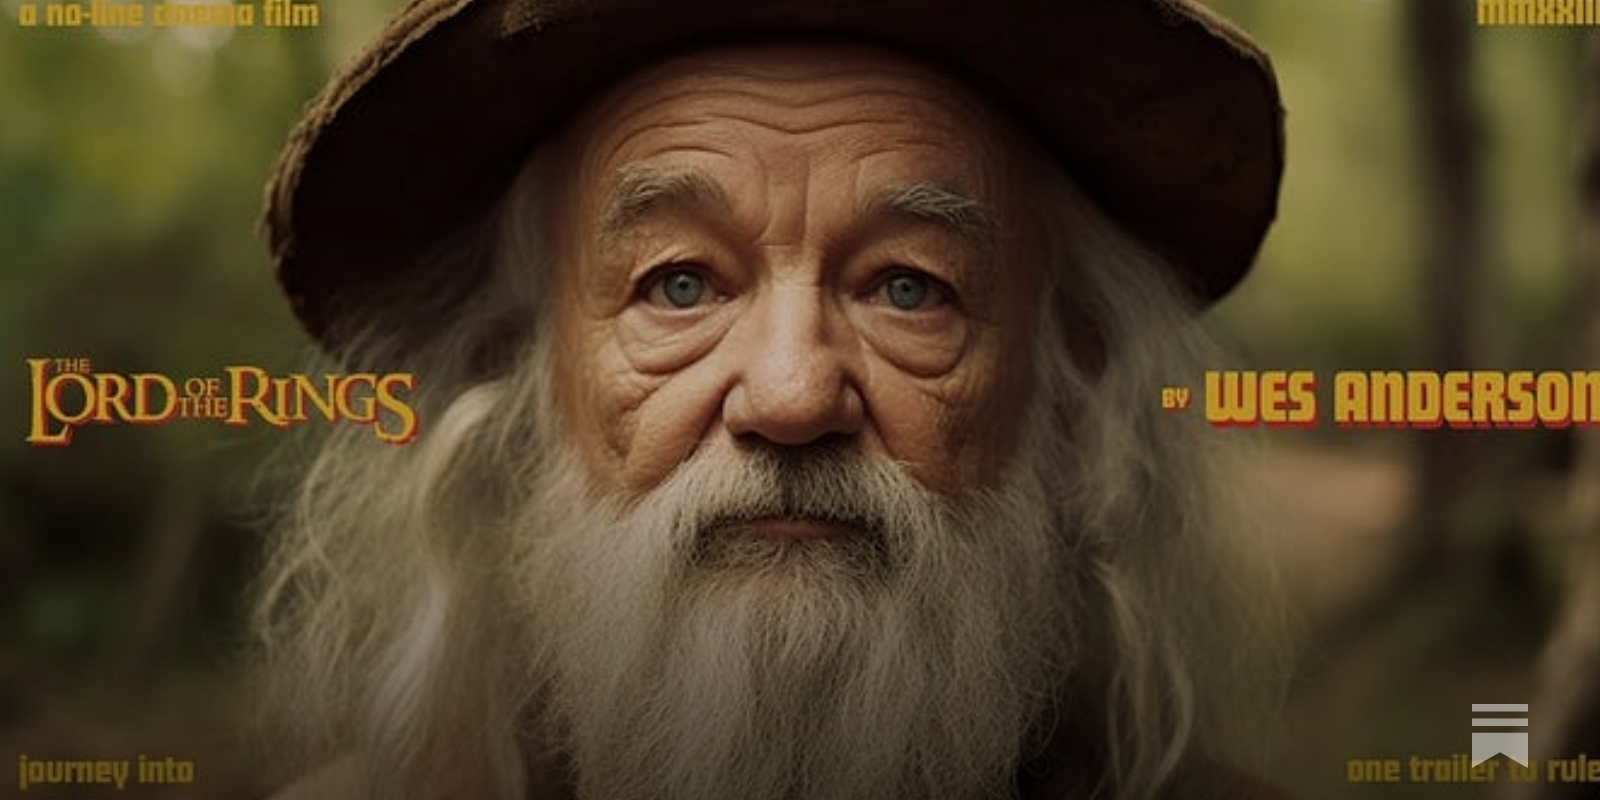 AI 'Lord of the Rings' trailer by Wes Anderson has the internet